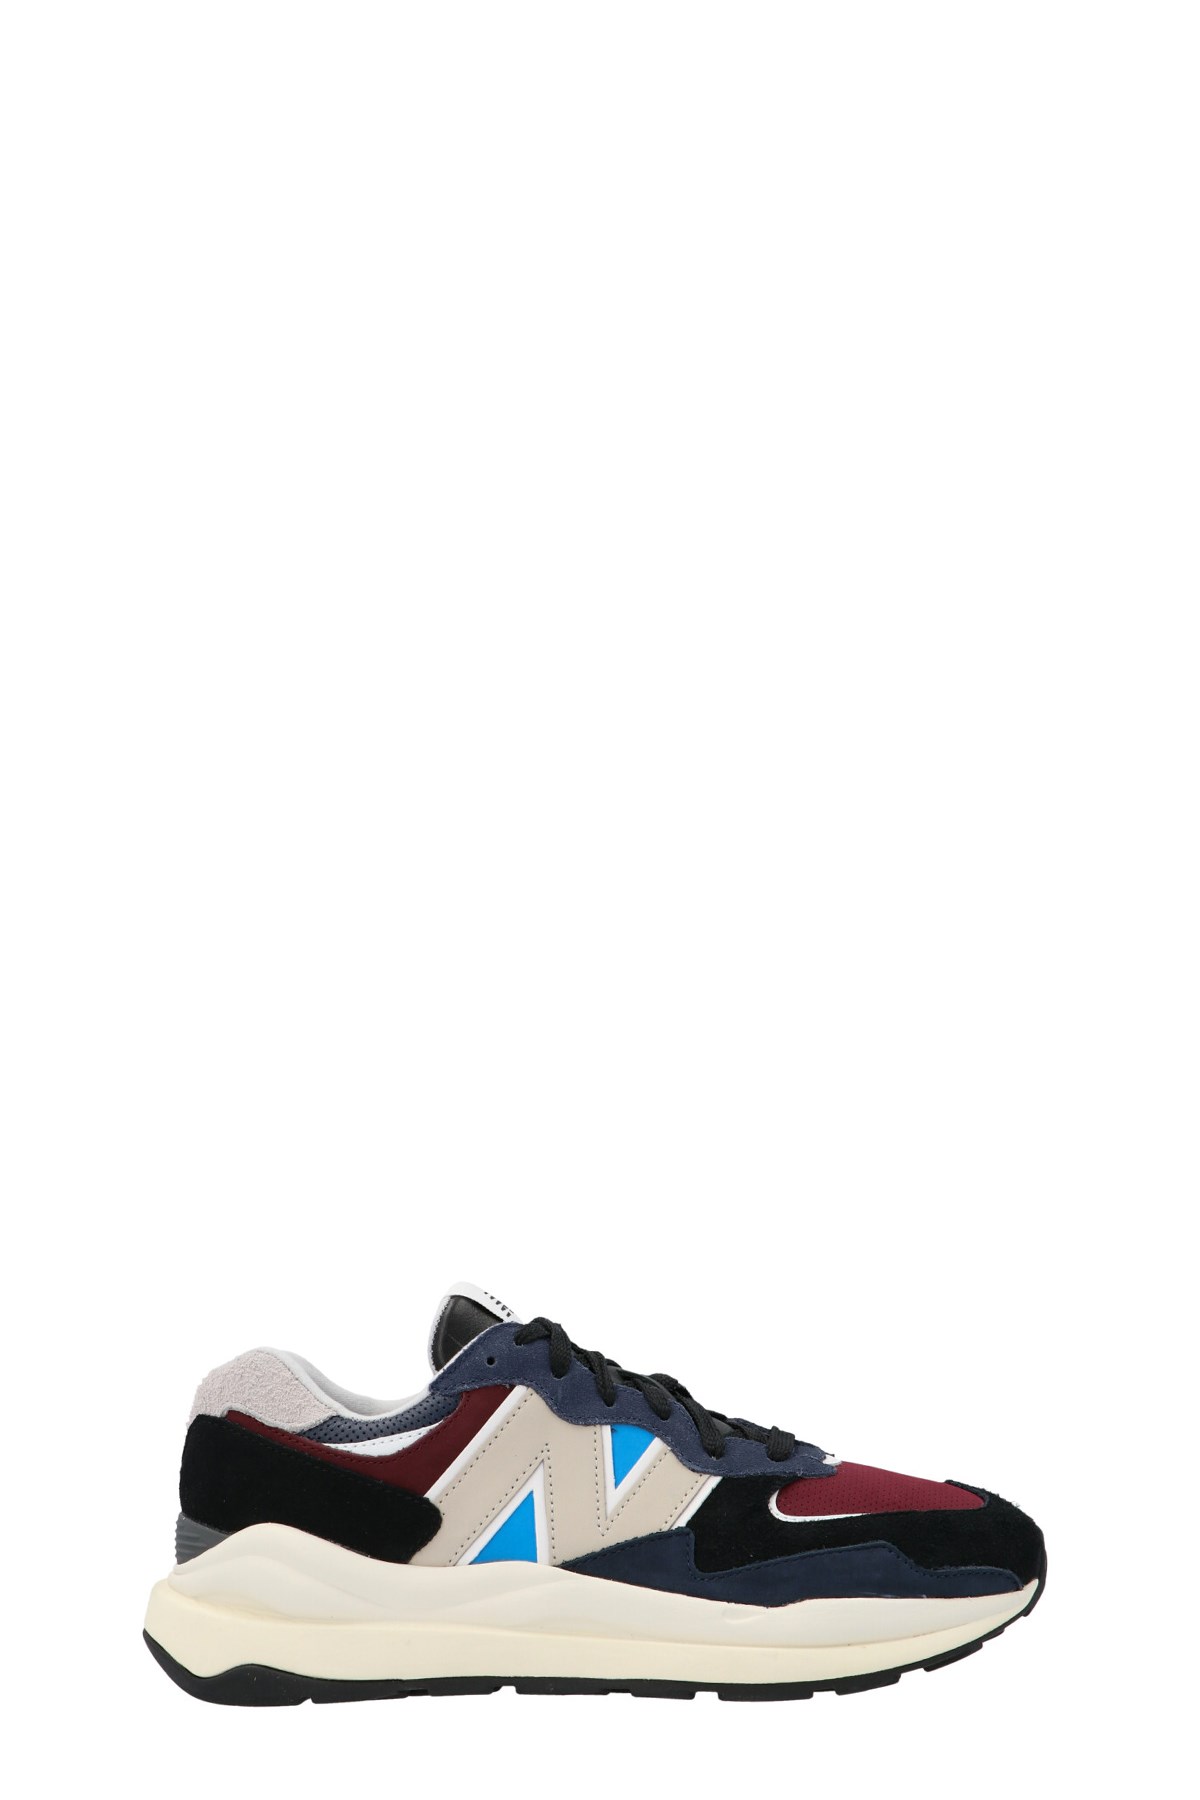 NEW BALANCE '5740’ Sneakers